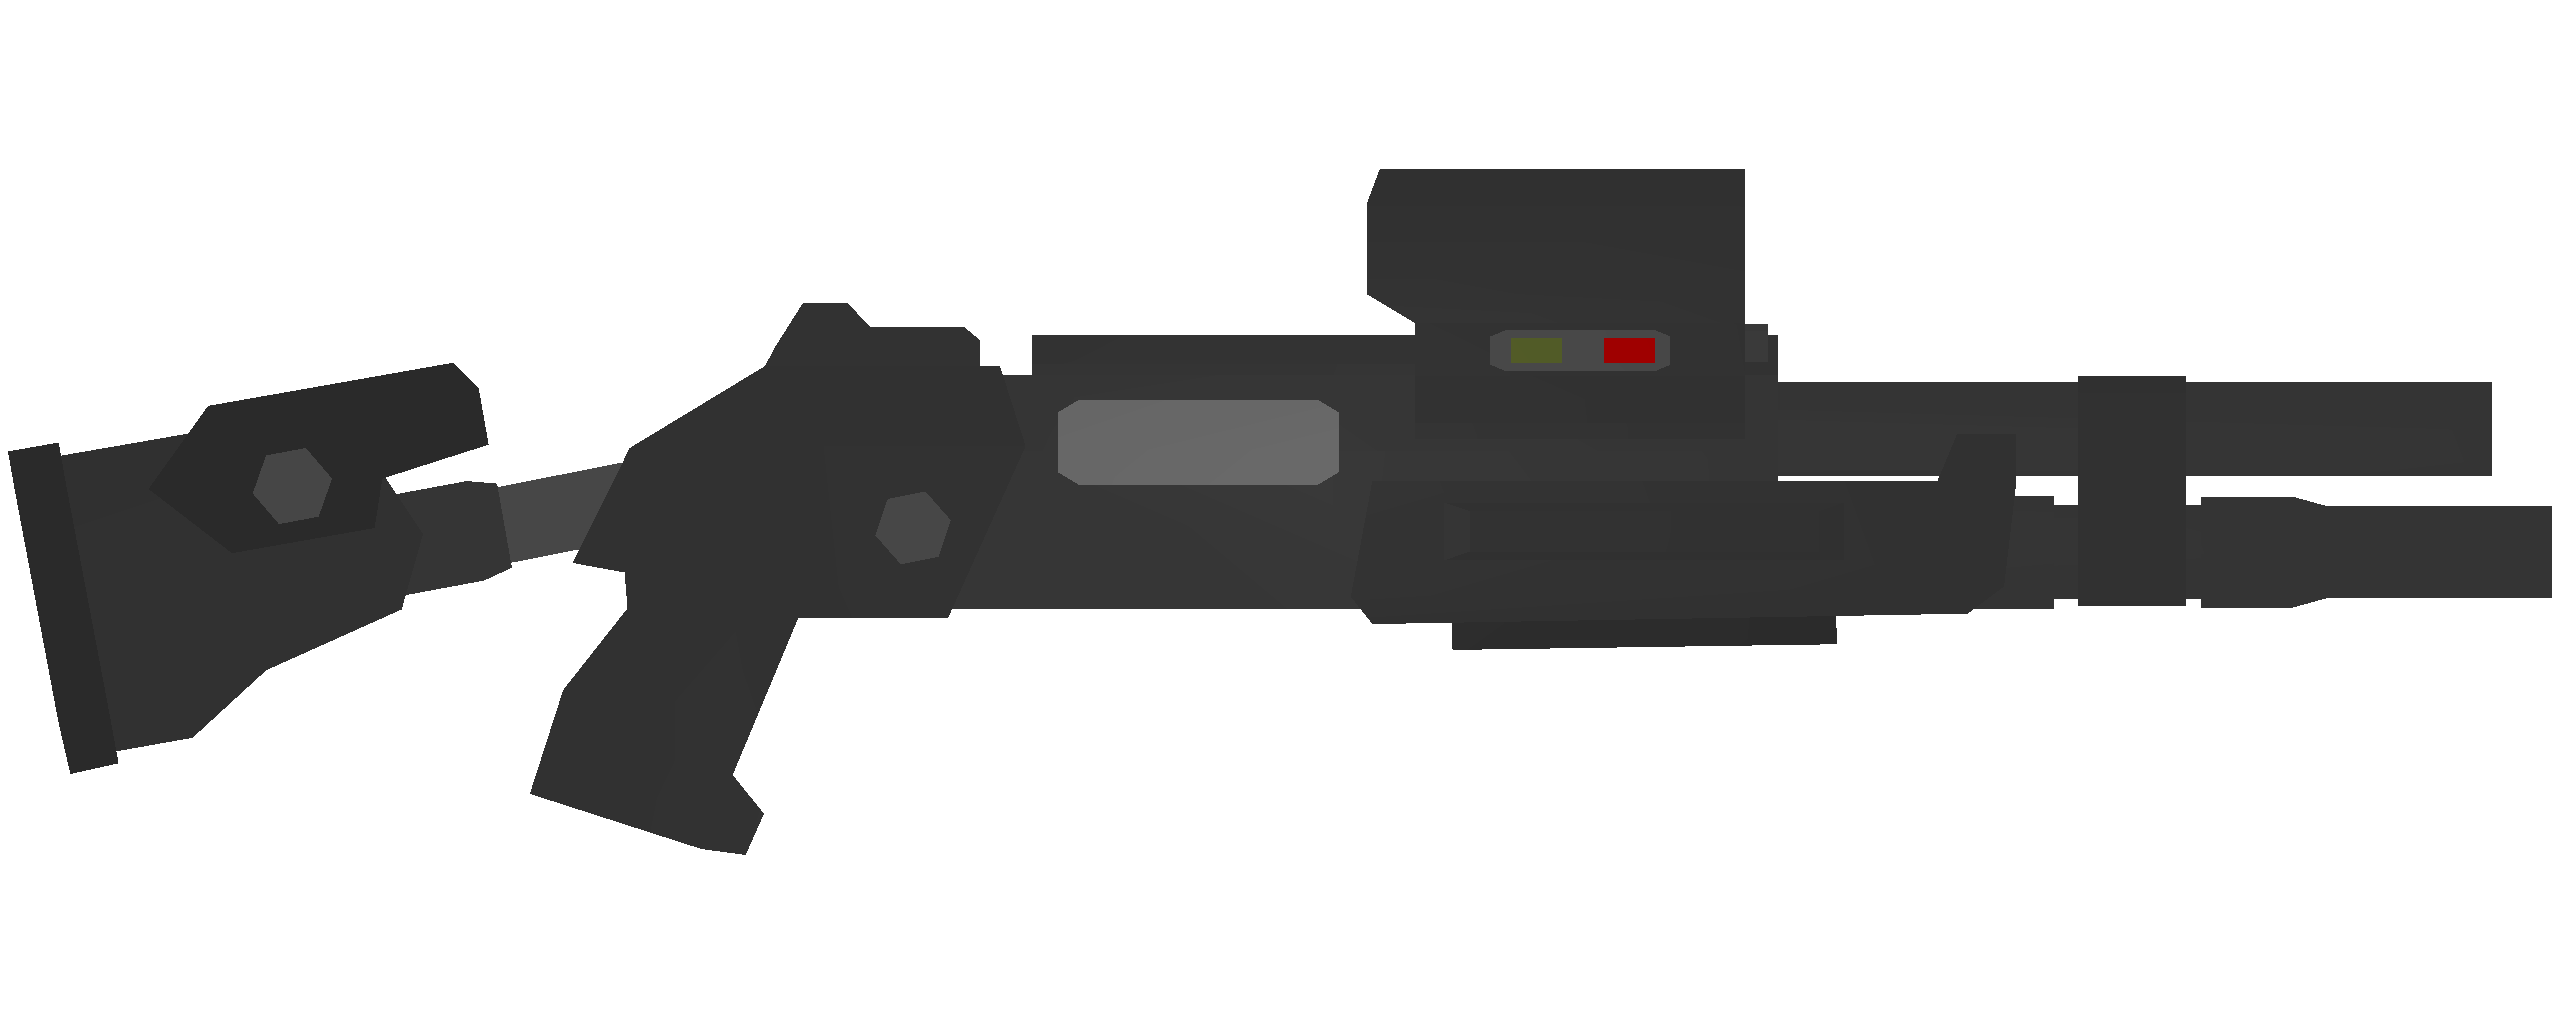 Unturned All ID lists for Magazines and Attachments - Kuwait Items Redux - Shotguns - F8C4A27